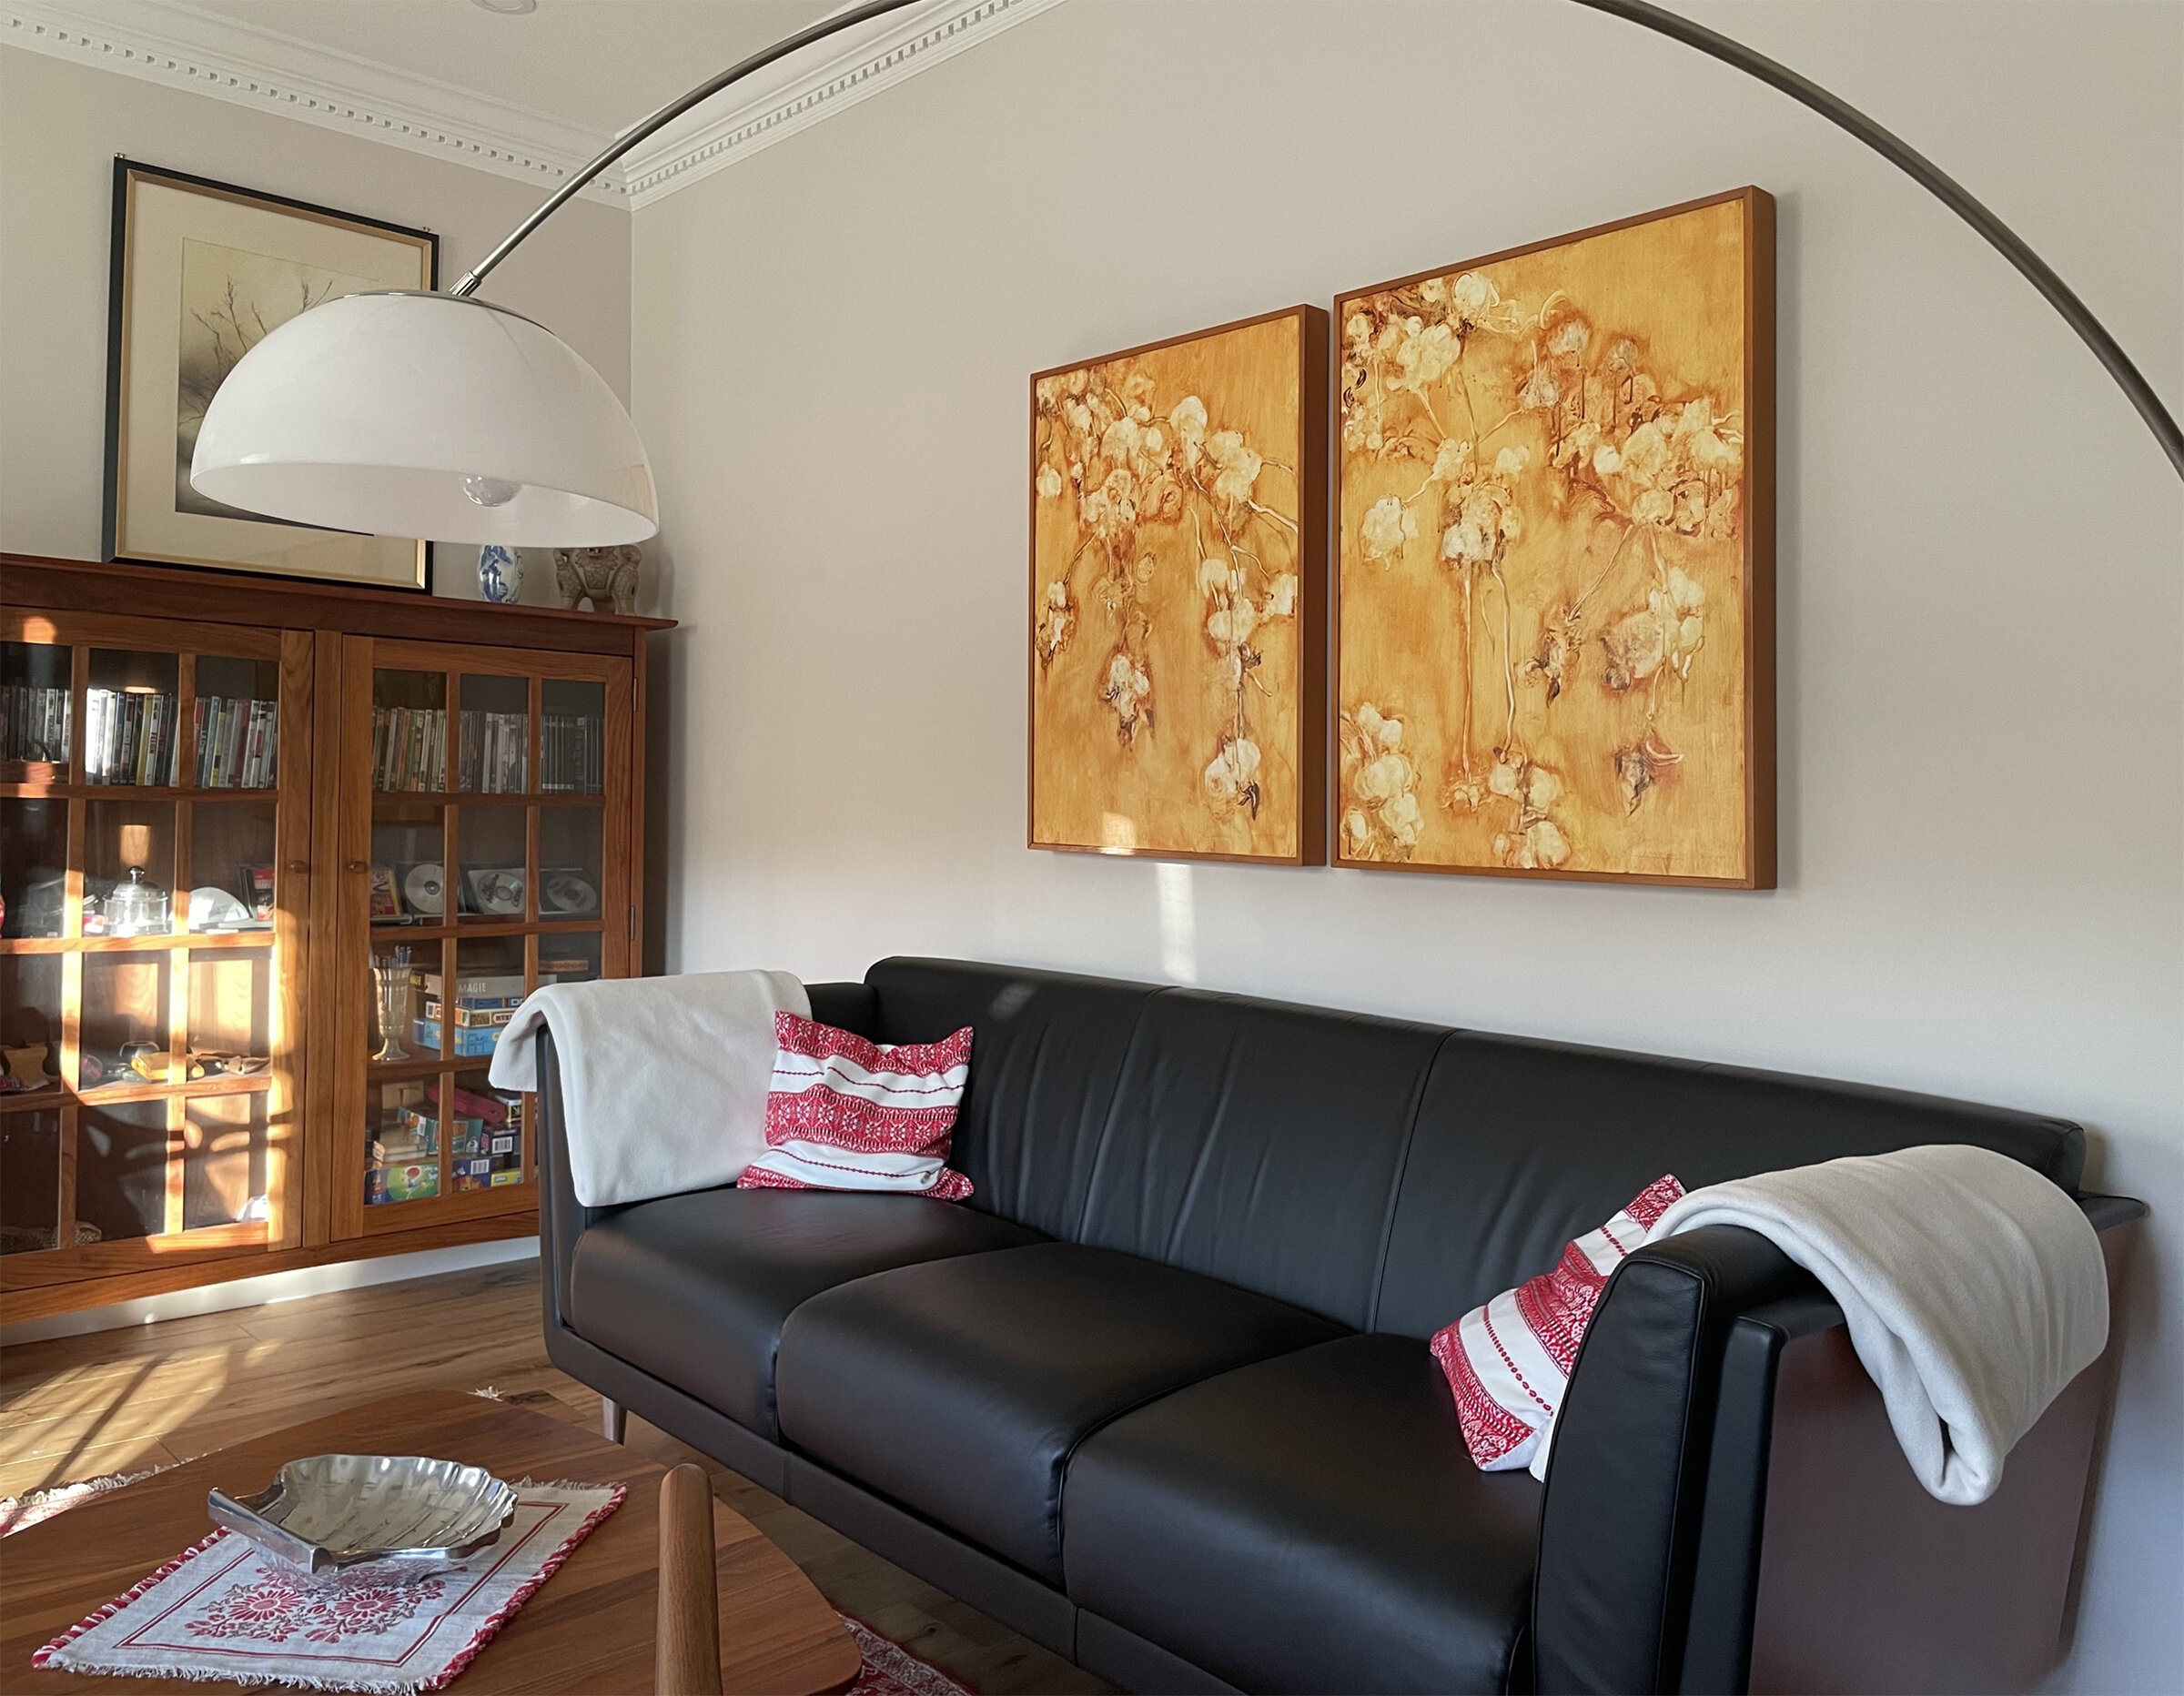 CHERRY BLOSSOM GOLD - Diptych (In Situ)